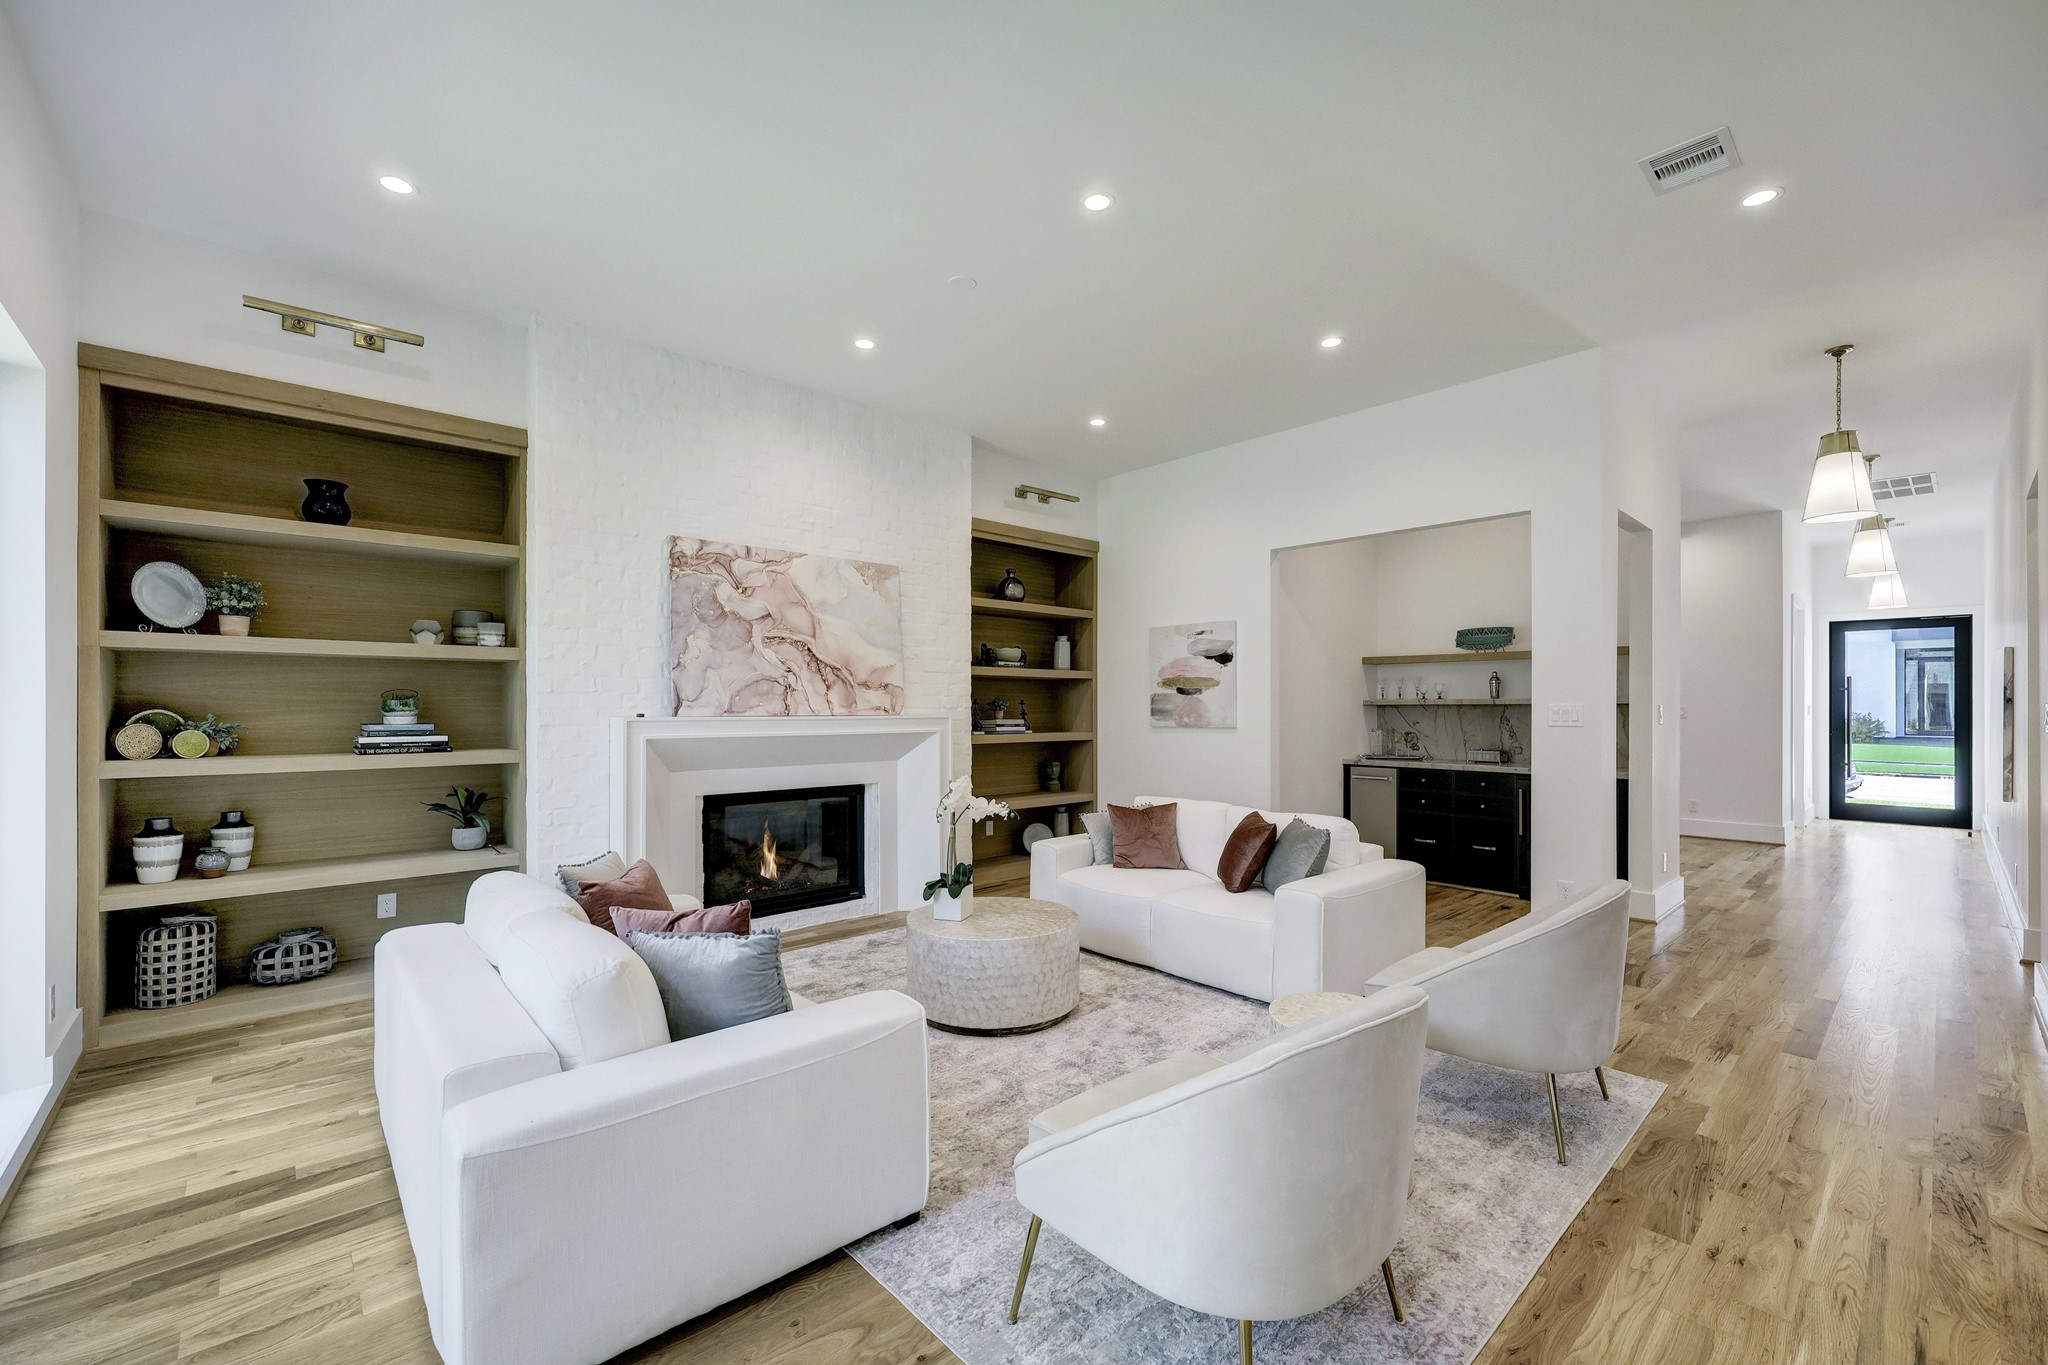 Great room with 11 ft. ceilings, fireplace, and wall of 8 ft. windows for natural light highlighted by wine room and dry bar with ice maker and beverage refrigerator